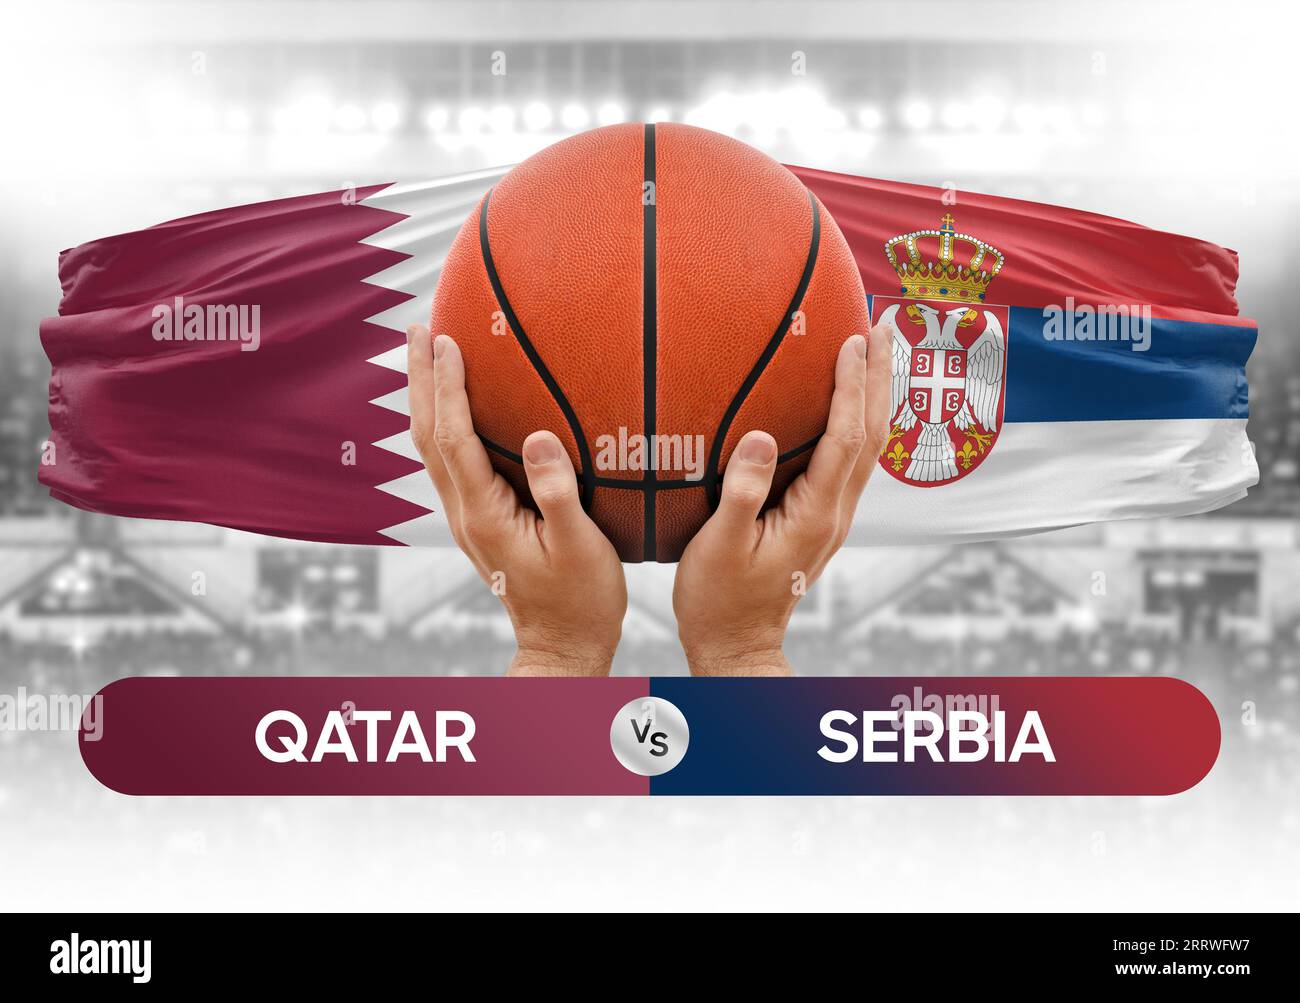 Qatar vs Serbia national basketball teams basket ball match competition cup concept image Stock Photo